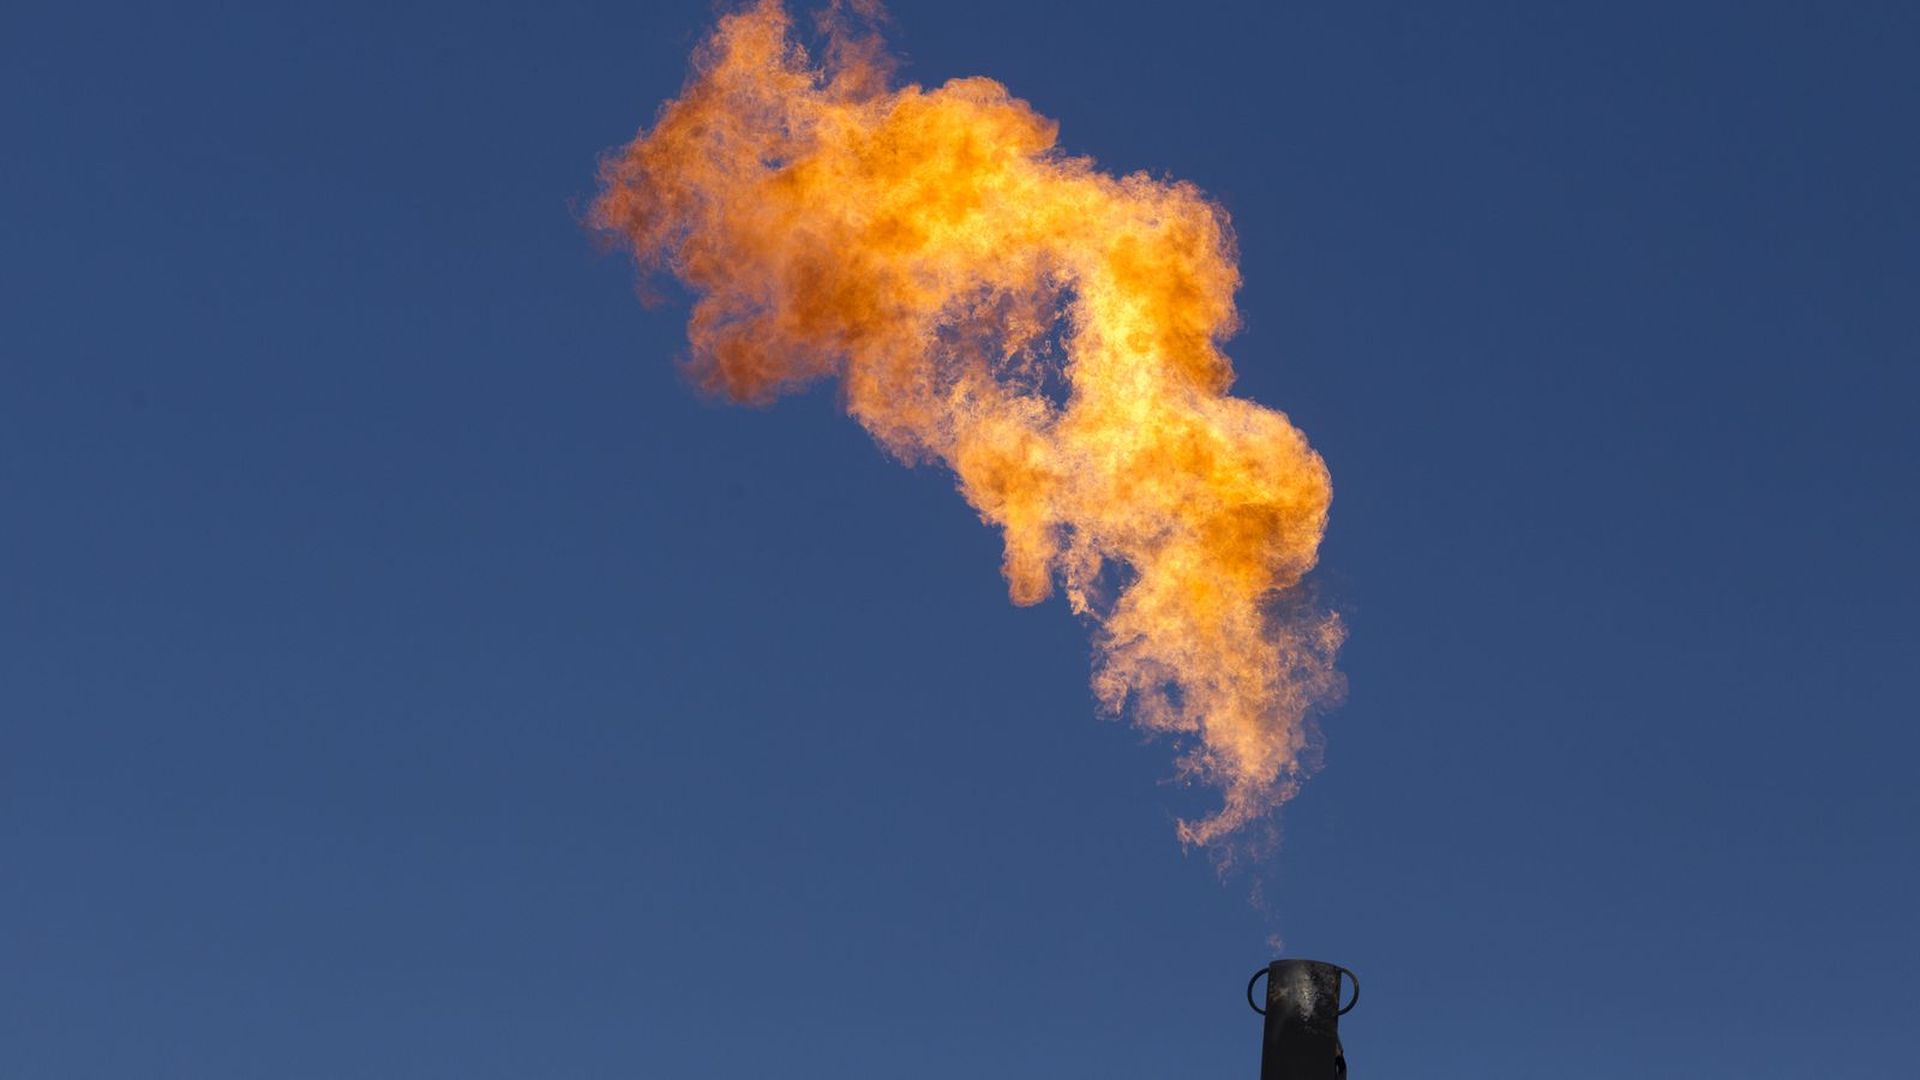 Flaring, burning excess natural gas, is happening all over Texas